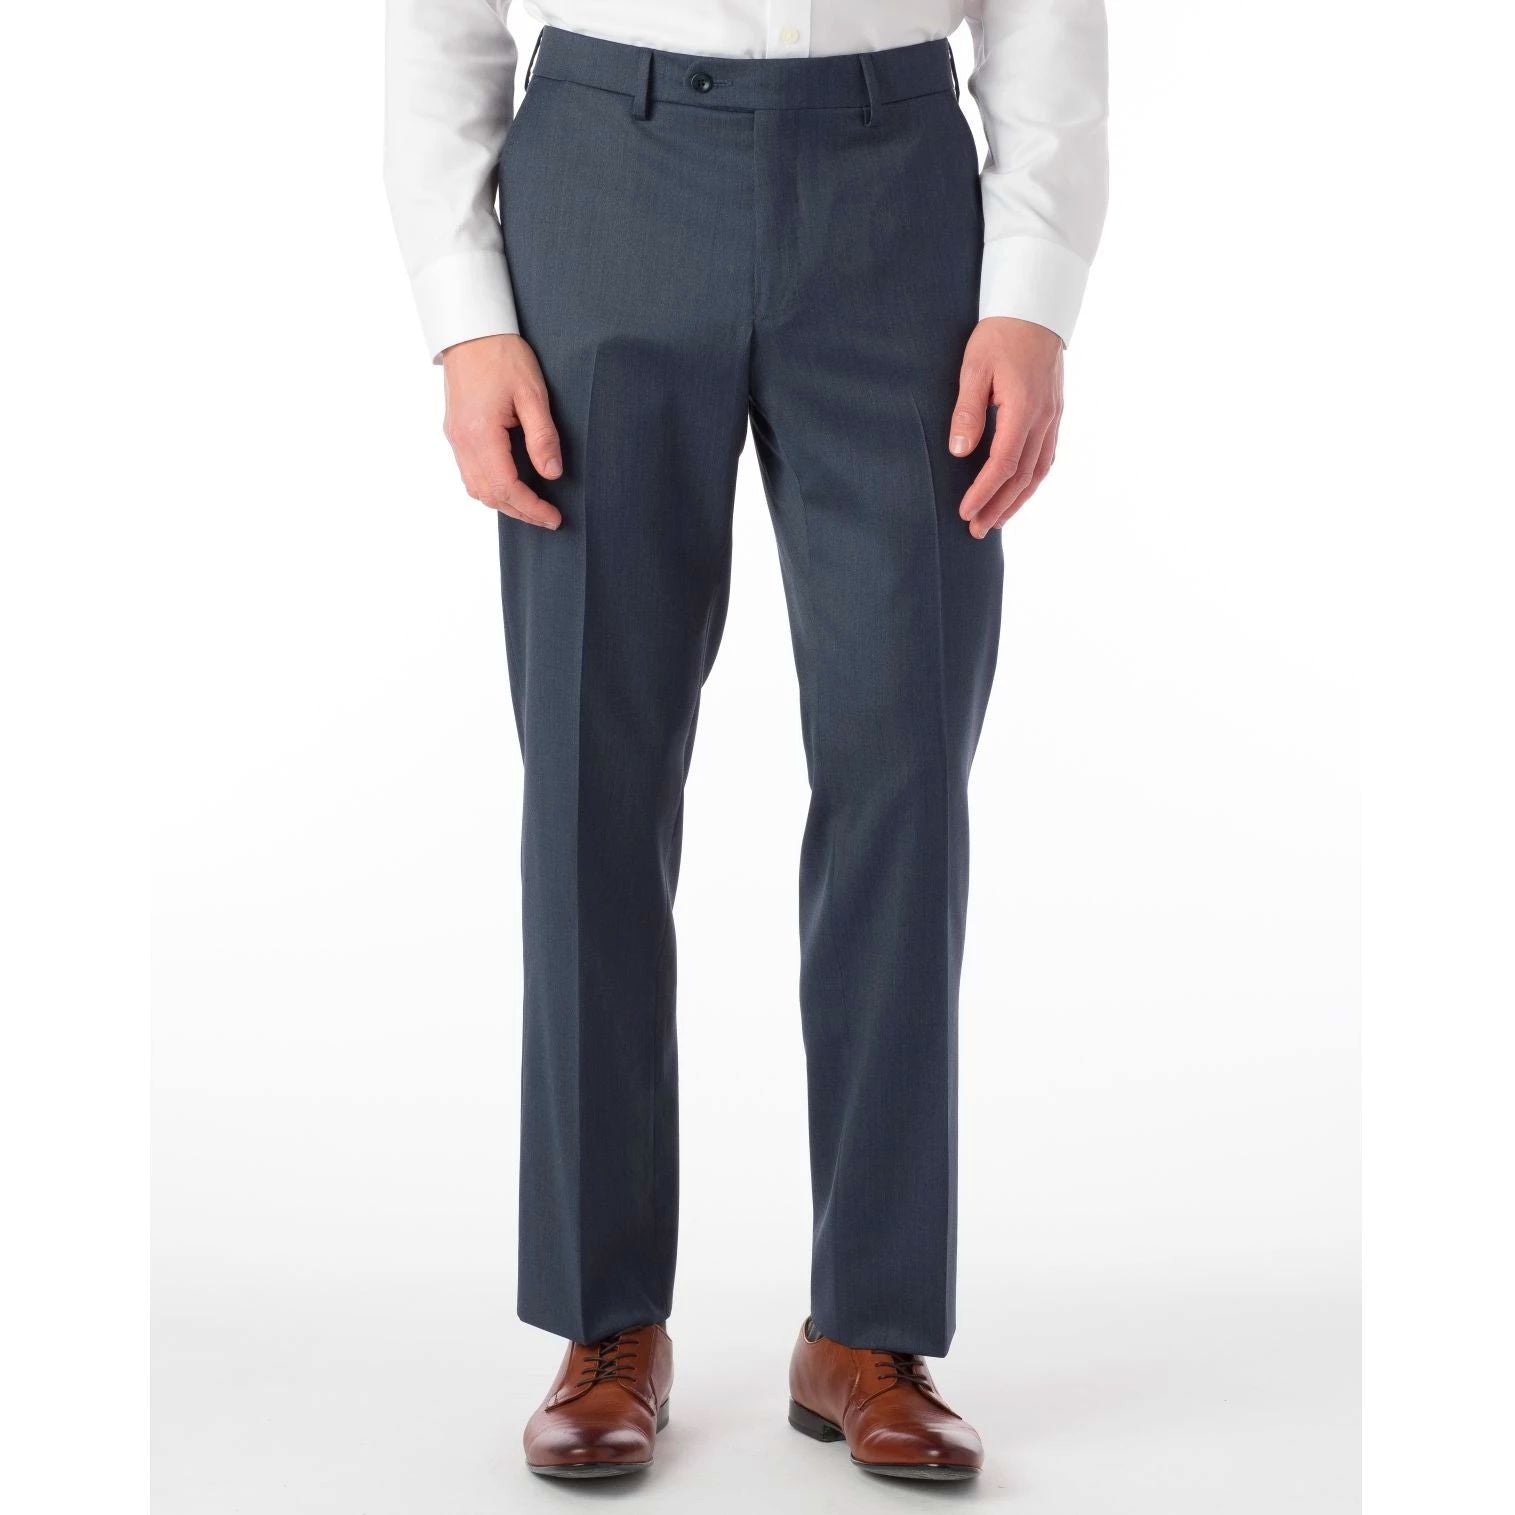 Super 130s Italian Luxury Ultimate Comfort Wool Tropical Flat Front Trouser in Navy Mix by 6 East by Ballin